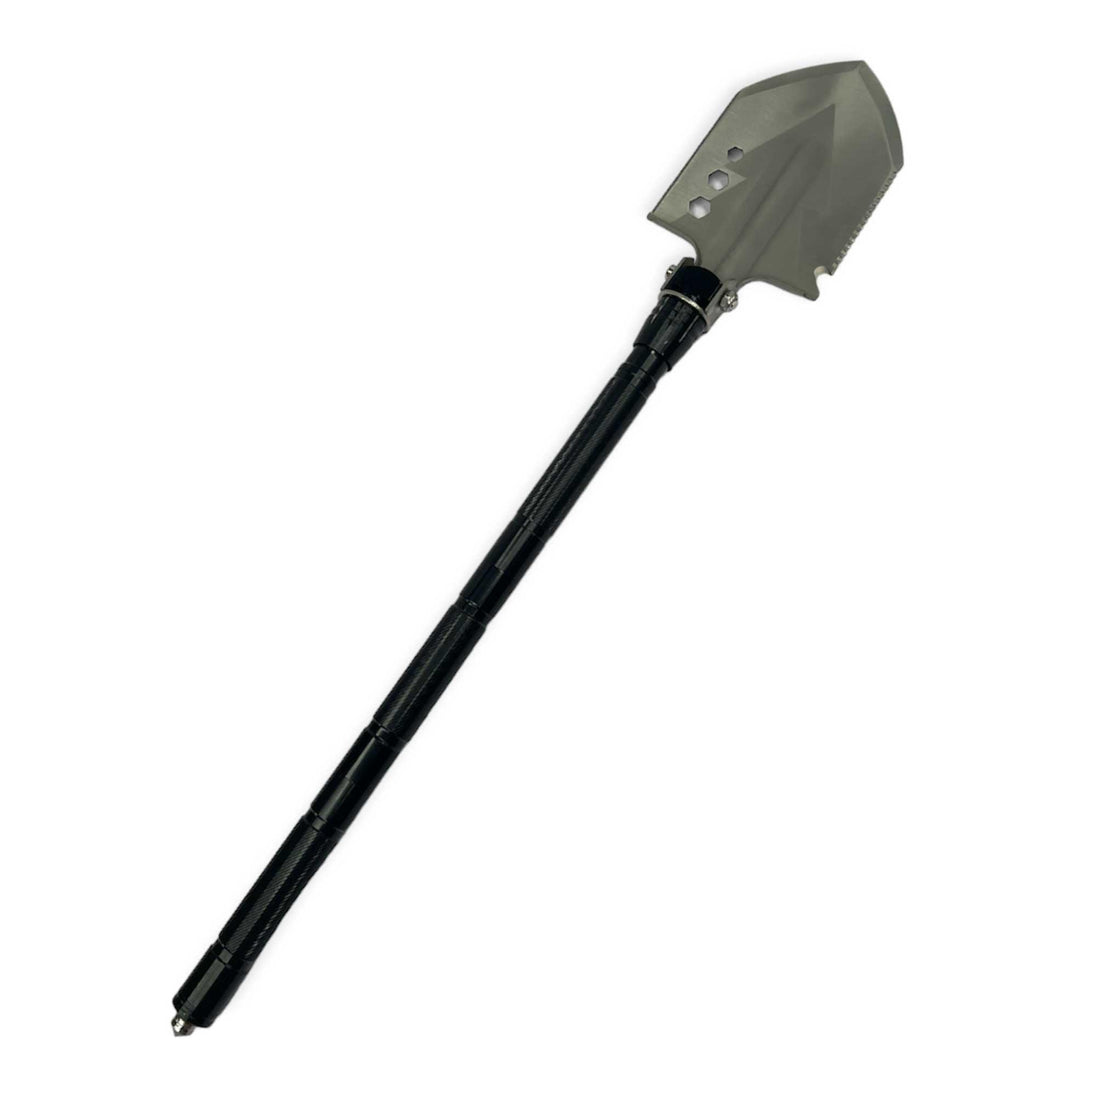 Buy Multifunction Folding Shovel - Camping Tactical Survival Multitool discounted | Products On Sale Australia